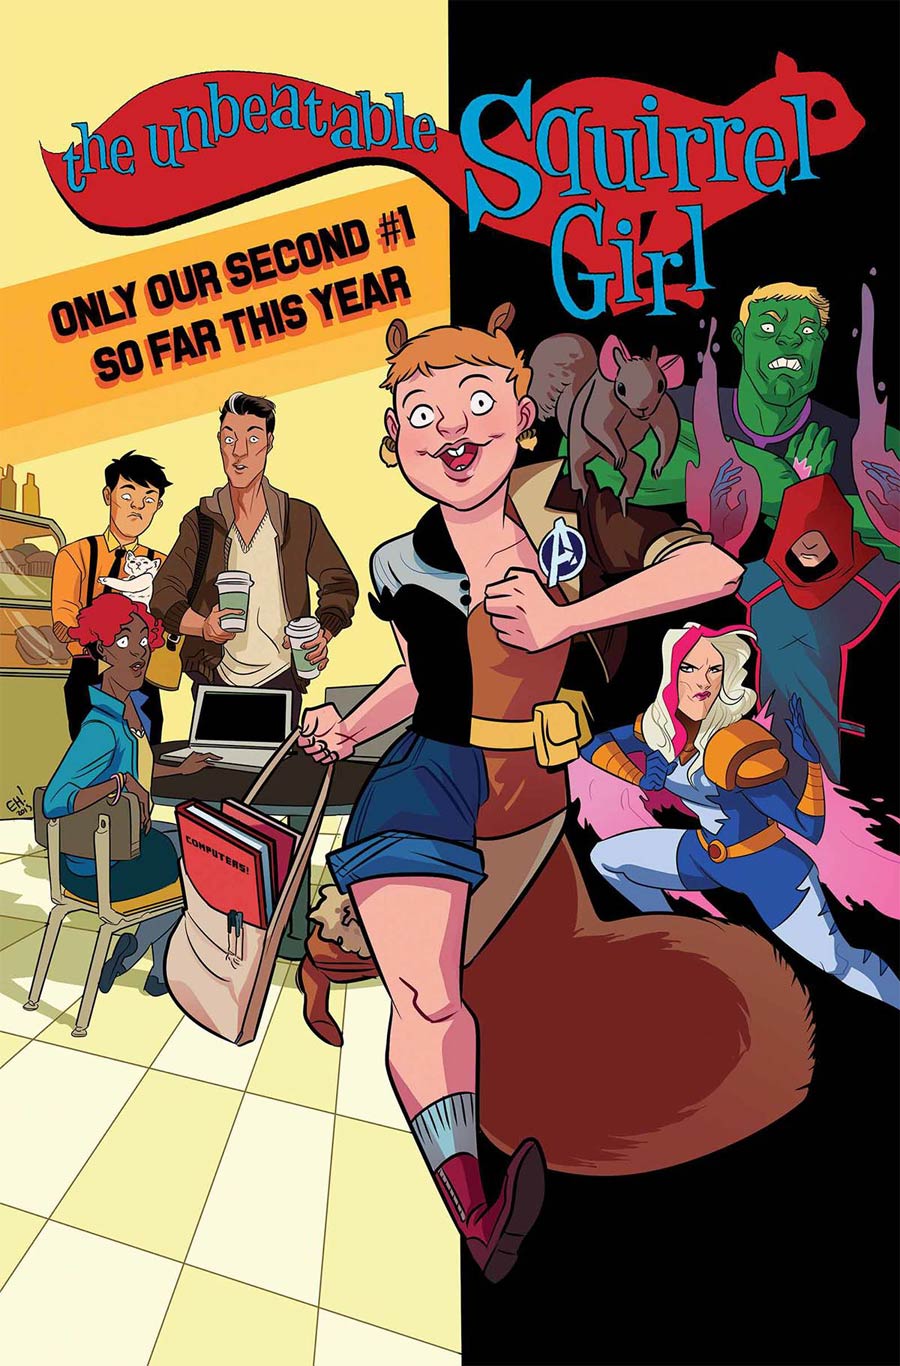 Unbeatable Squirrel Girl Vol 2 #1 By Erica Henderson Poster